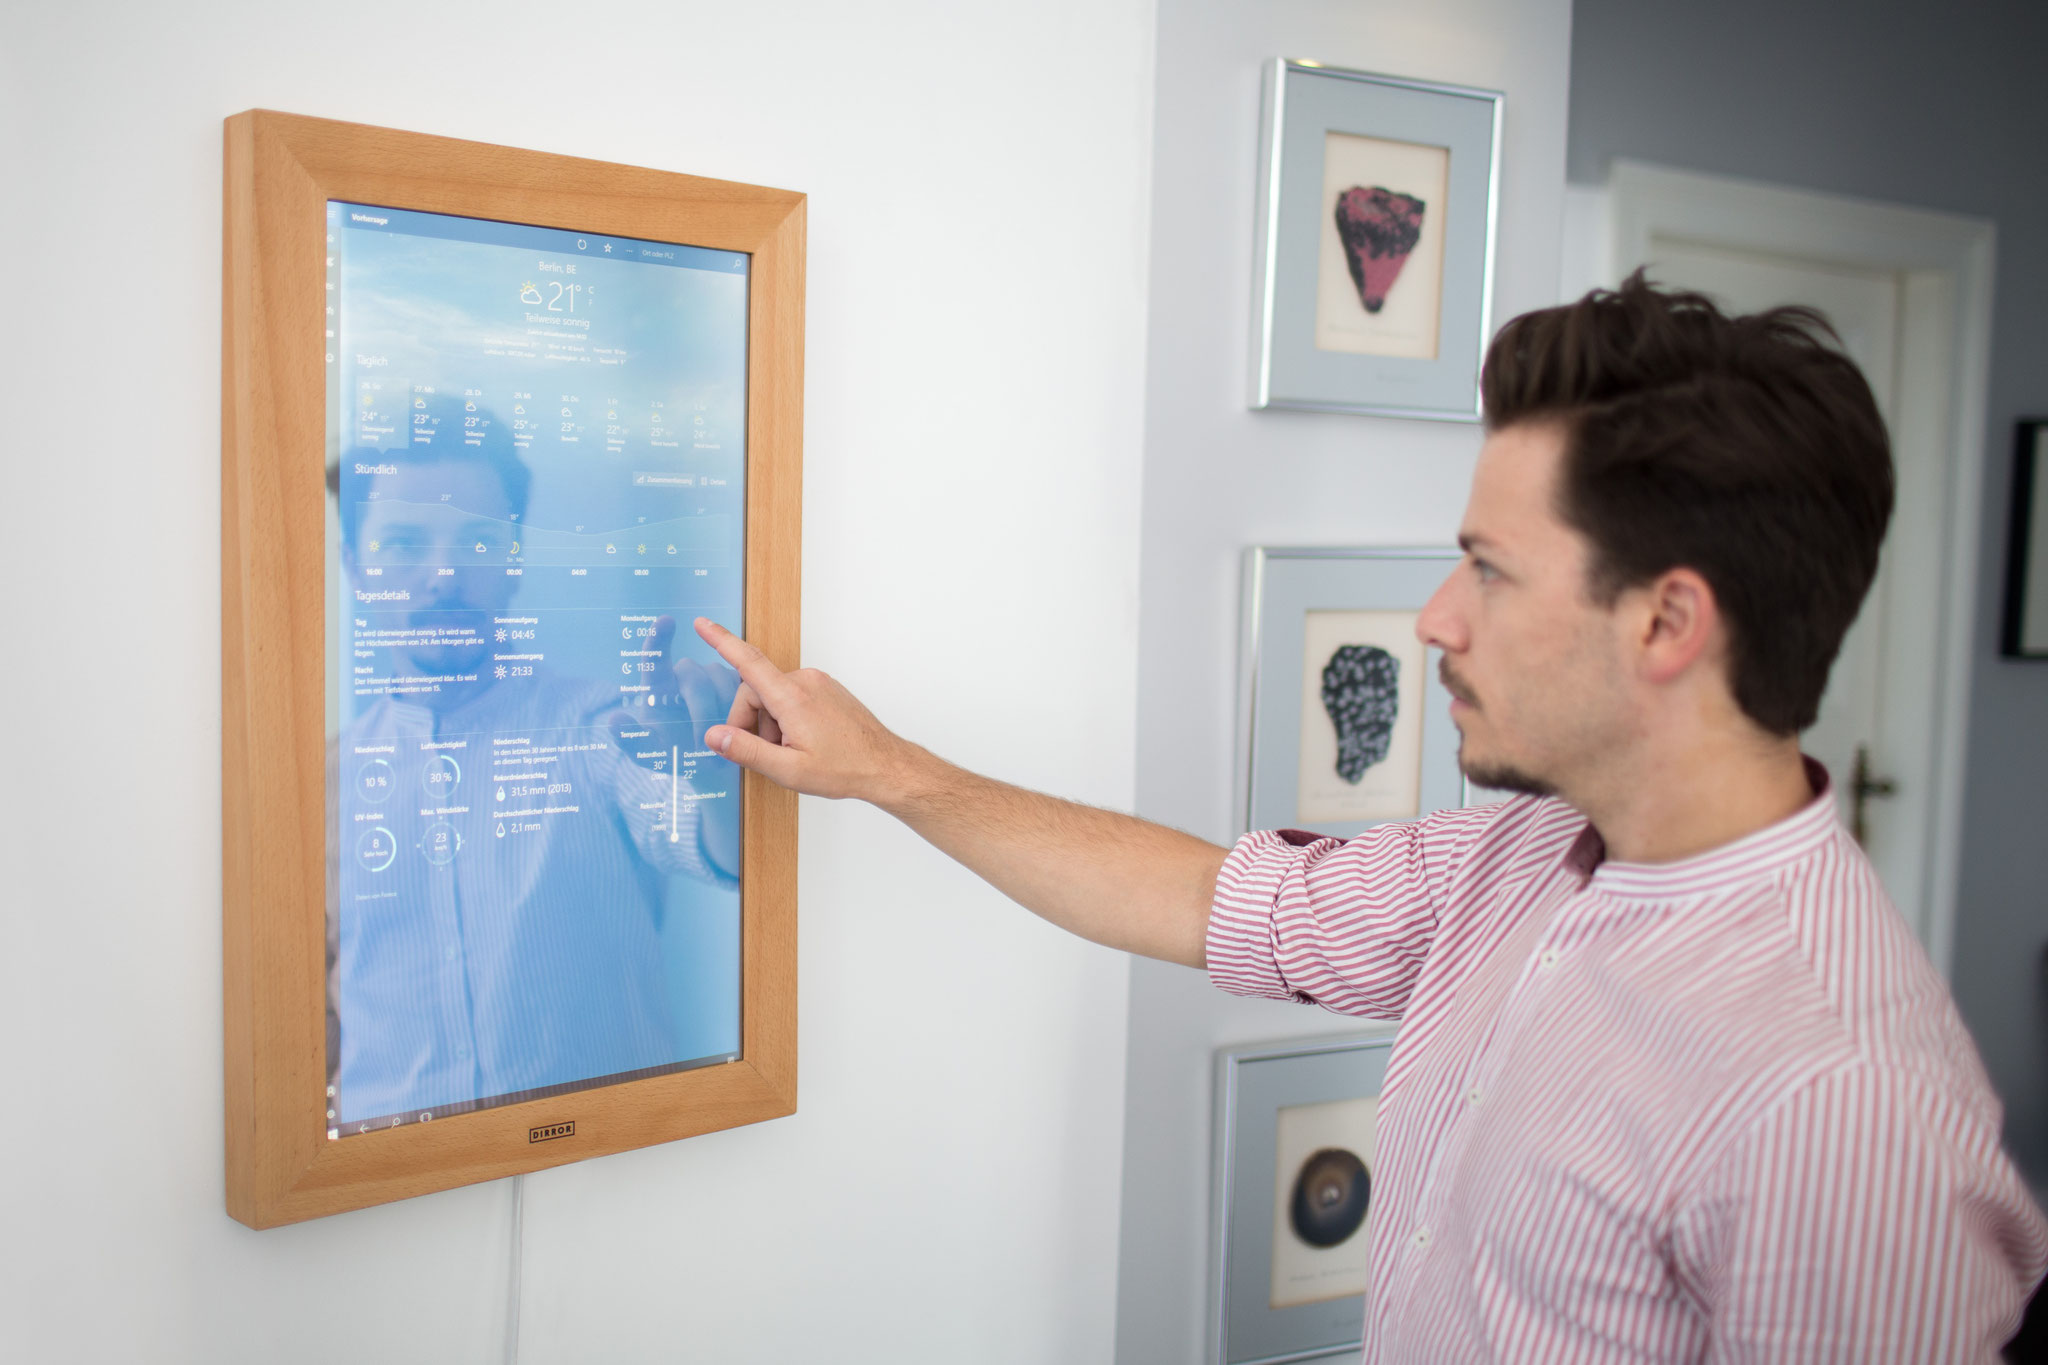 You can now buy a digital mirror running Windows 10